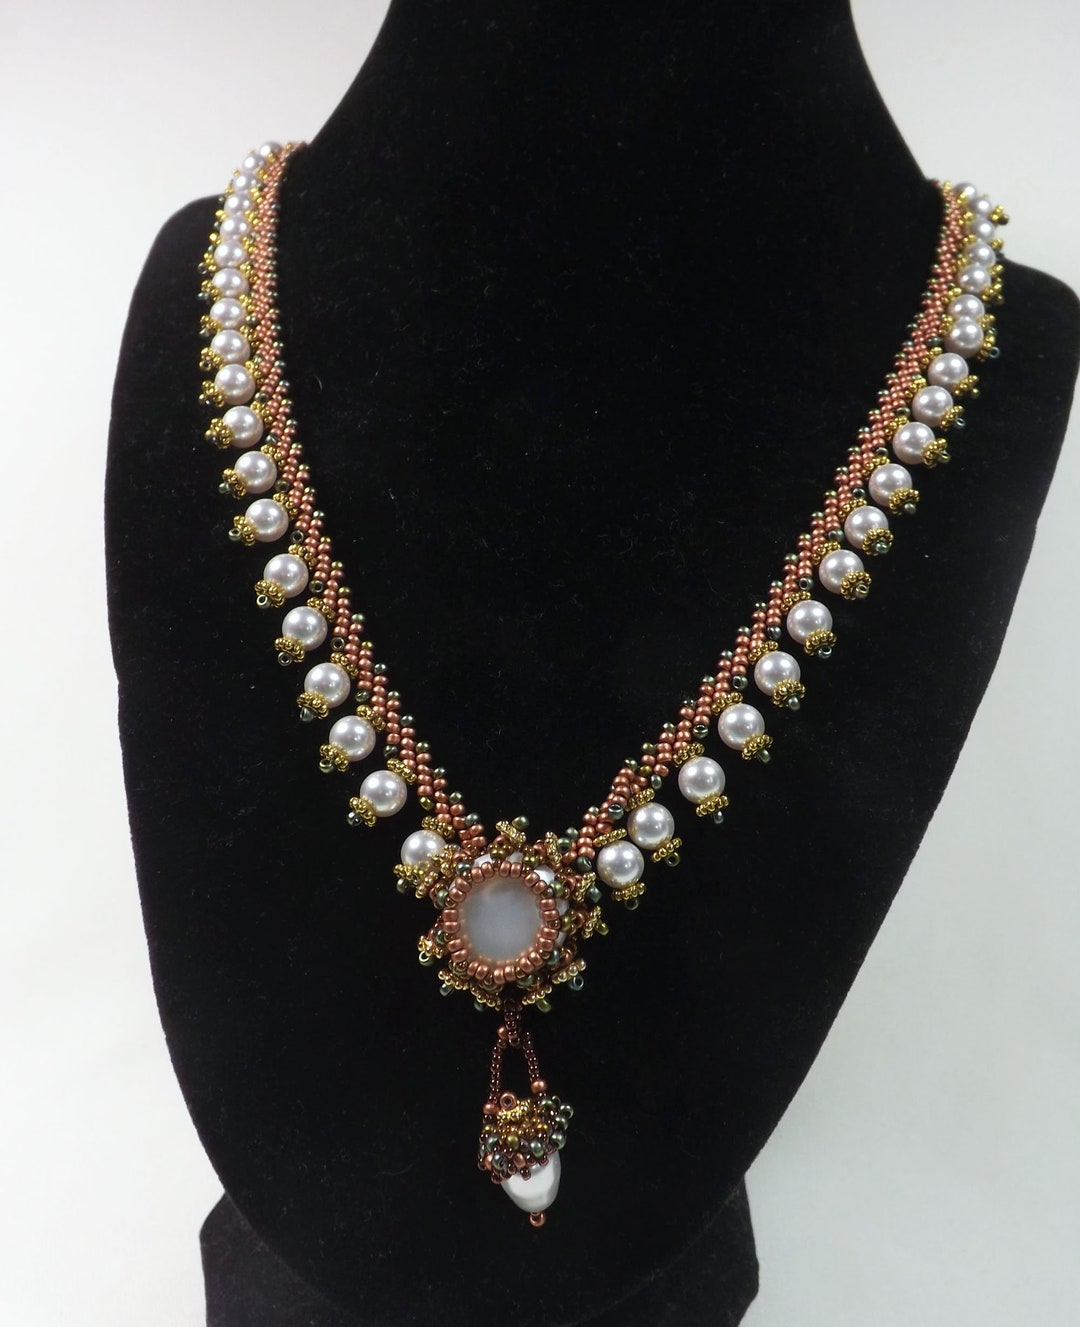 Hand Beaded Seed Bead and Pearls Necklace Seed Bead Jewelry - Etsy